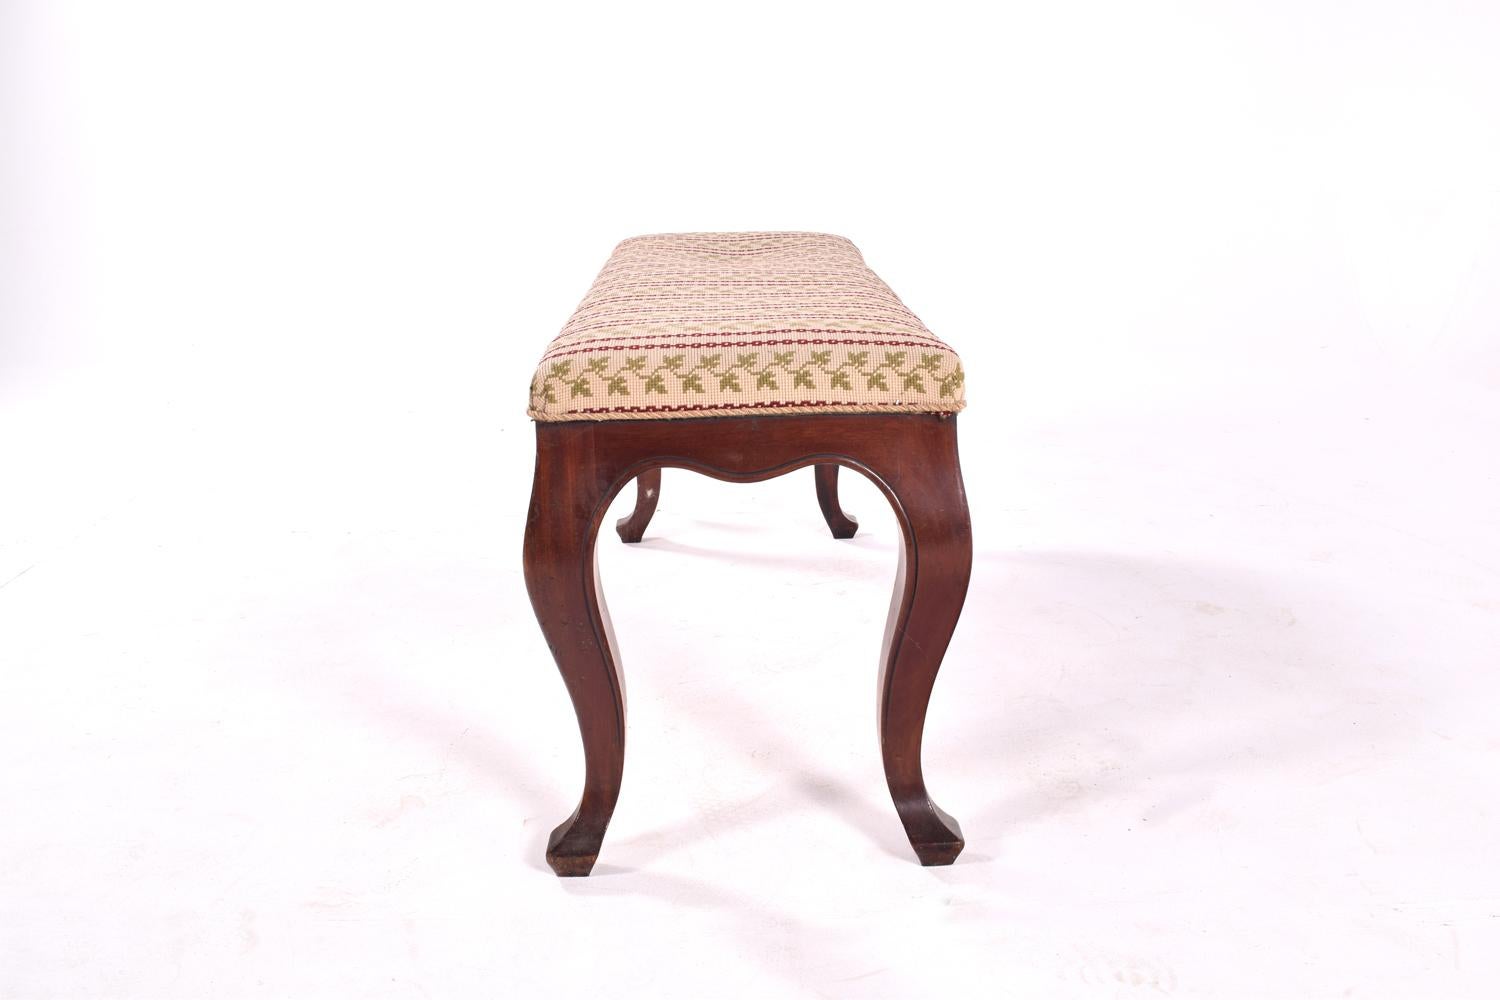 Beautiful Queen Anne style cabriole legged mahogany duet piano stool. Tapestry seat. Dark sturdy frame.